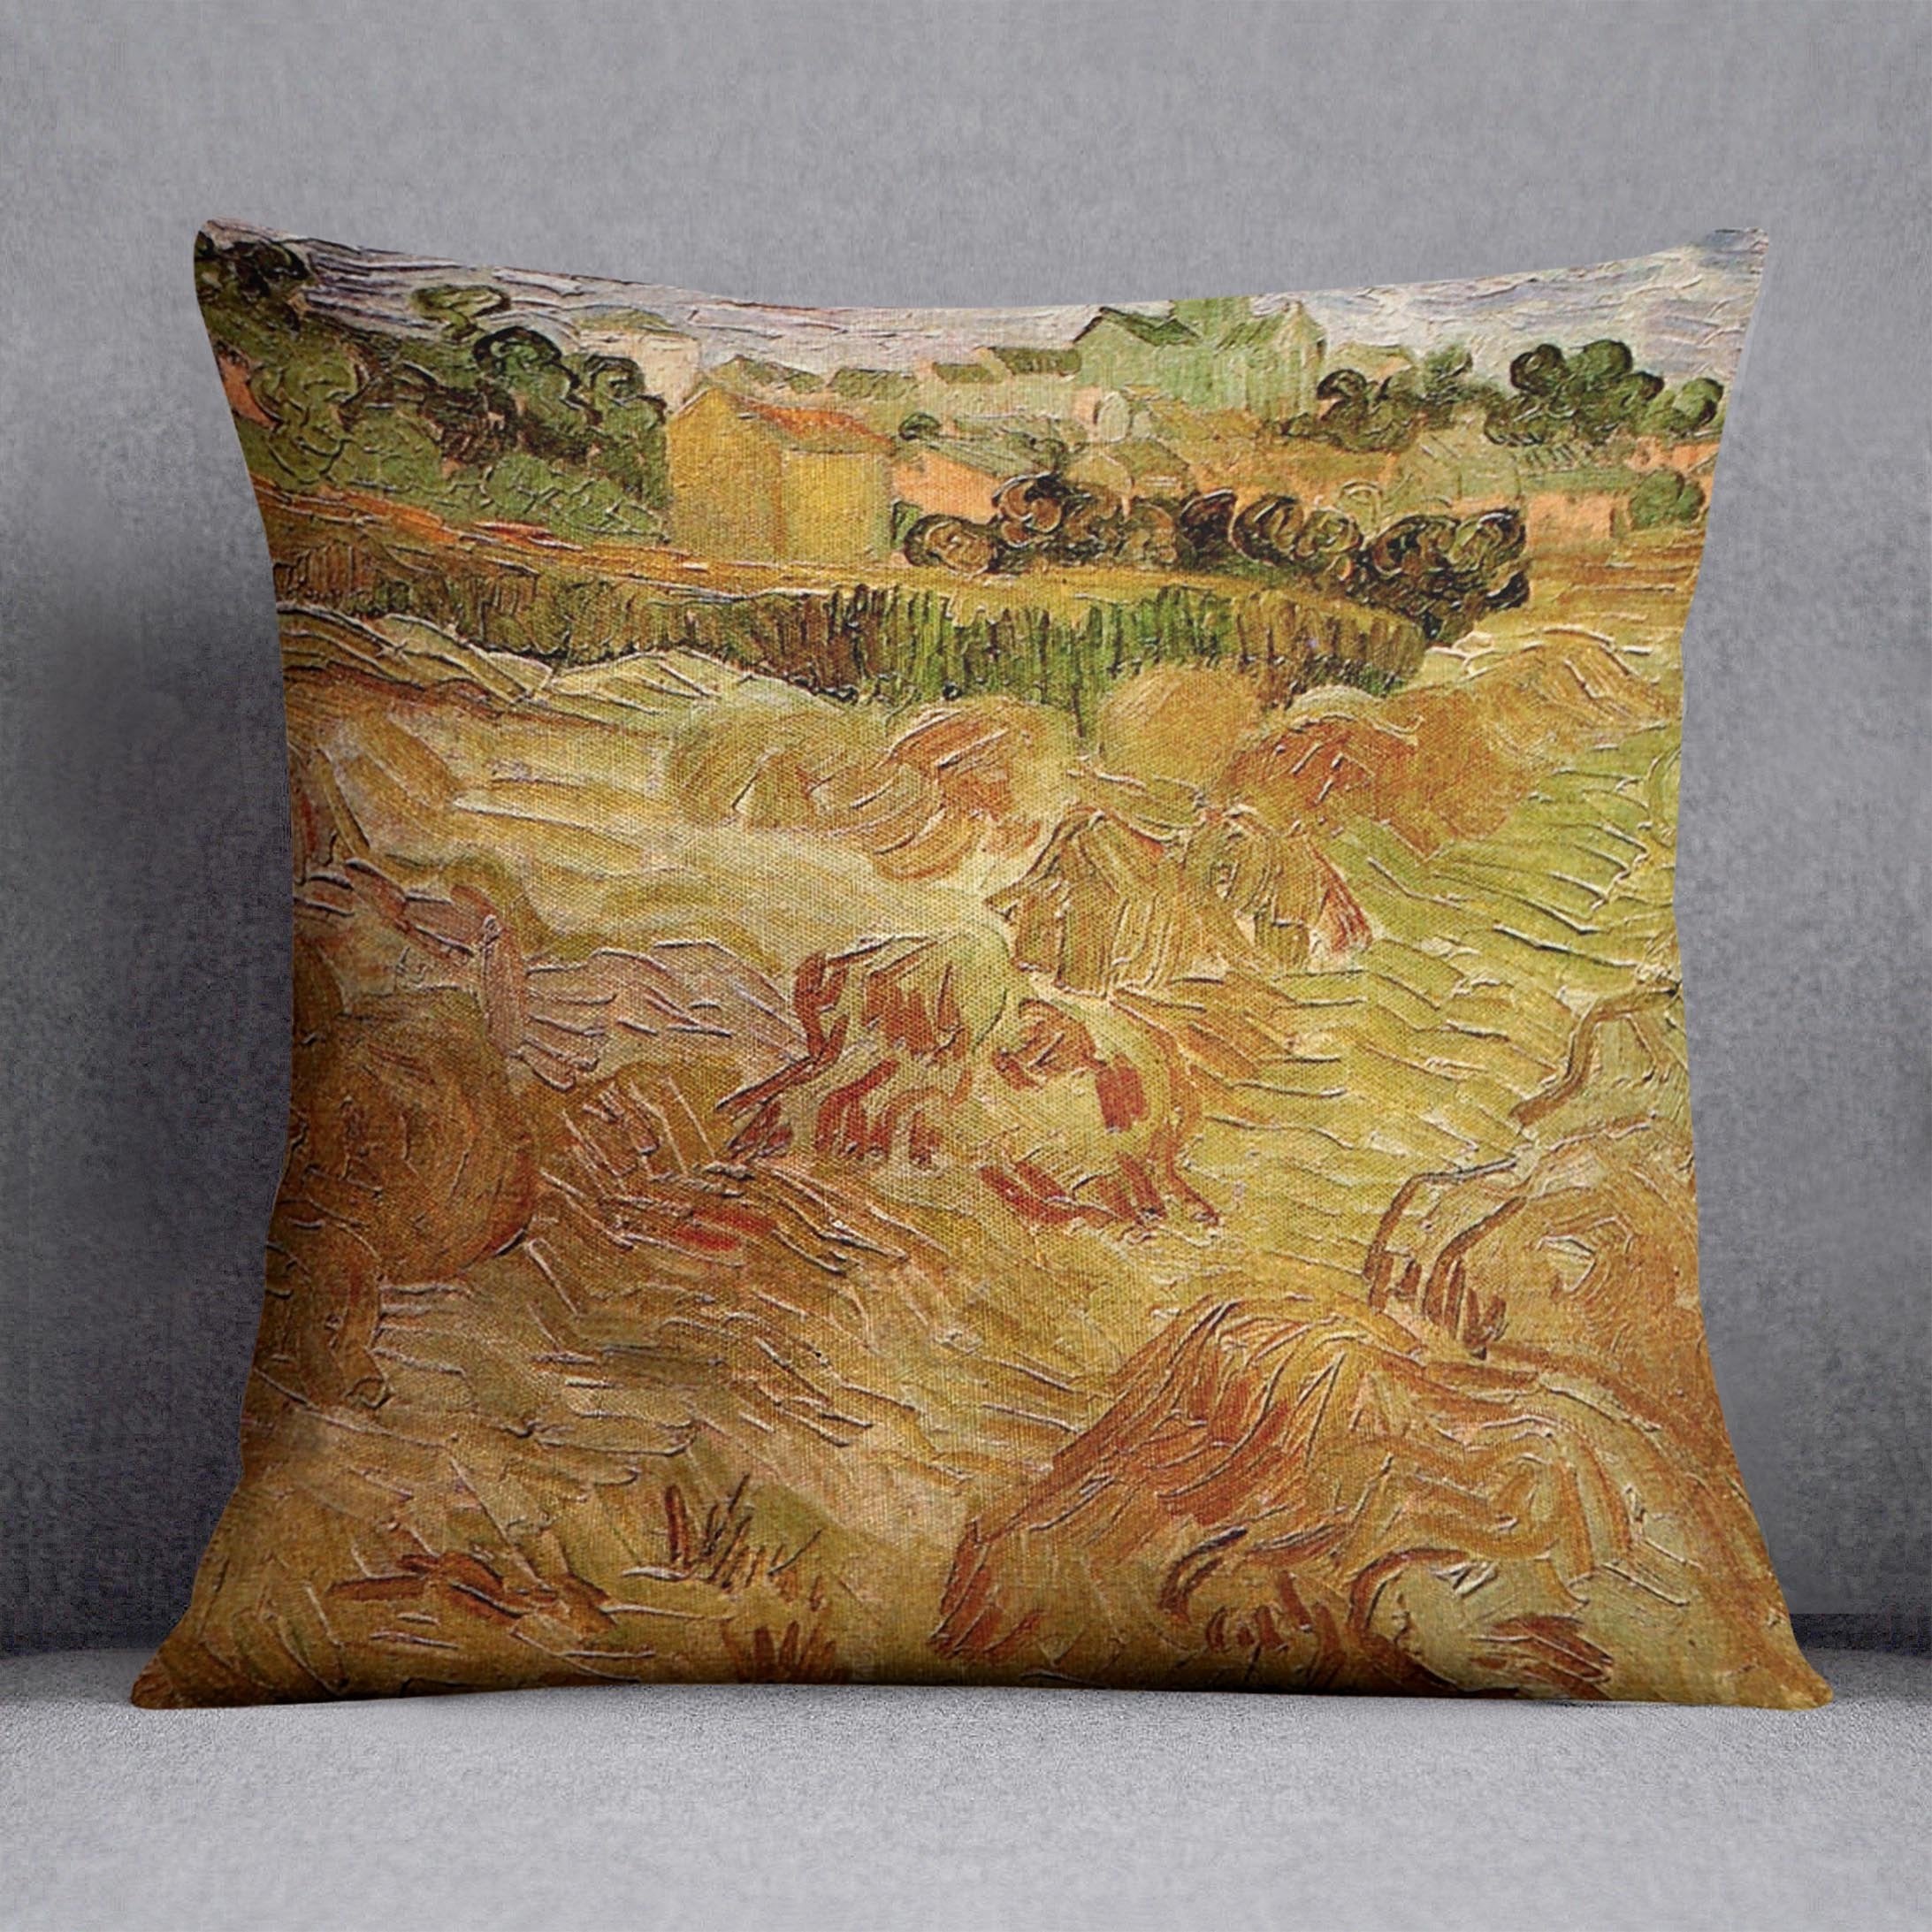 Wheat Fields with Auvers in the Background by Van Gogh Throw Pillow